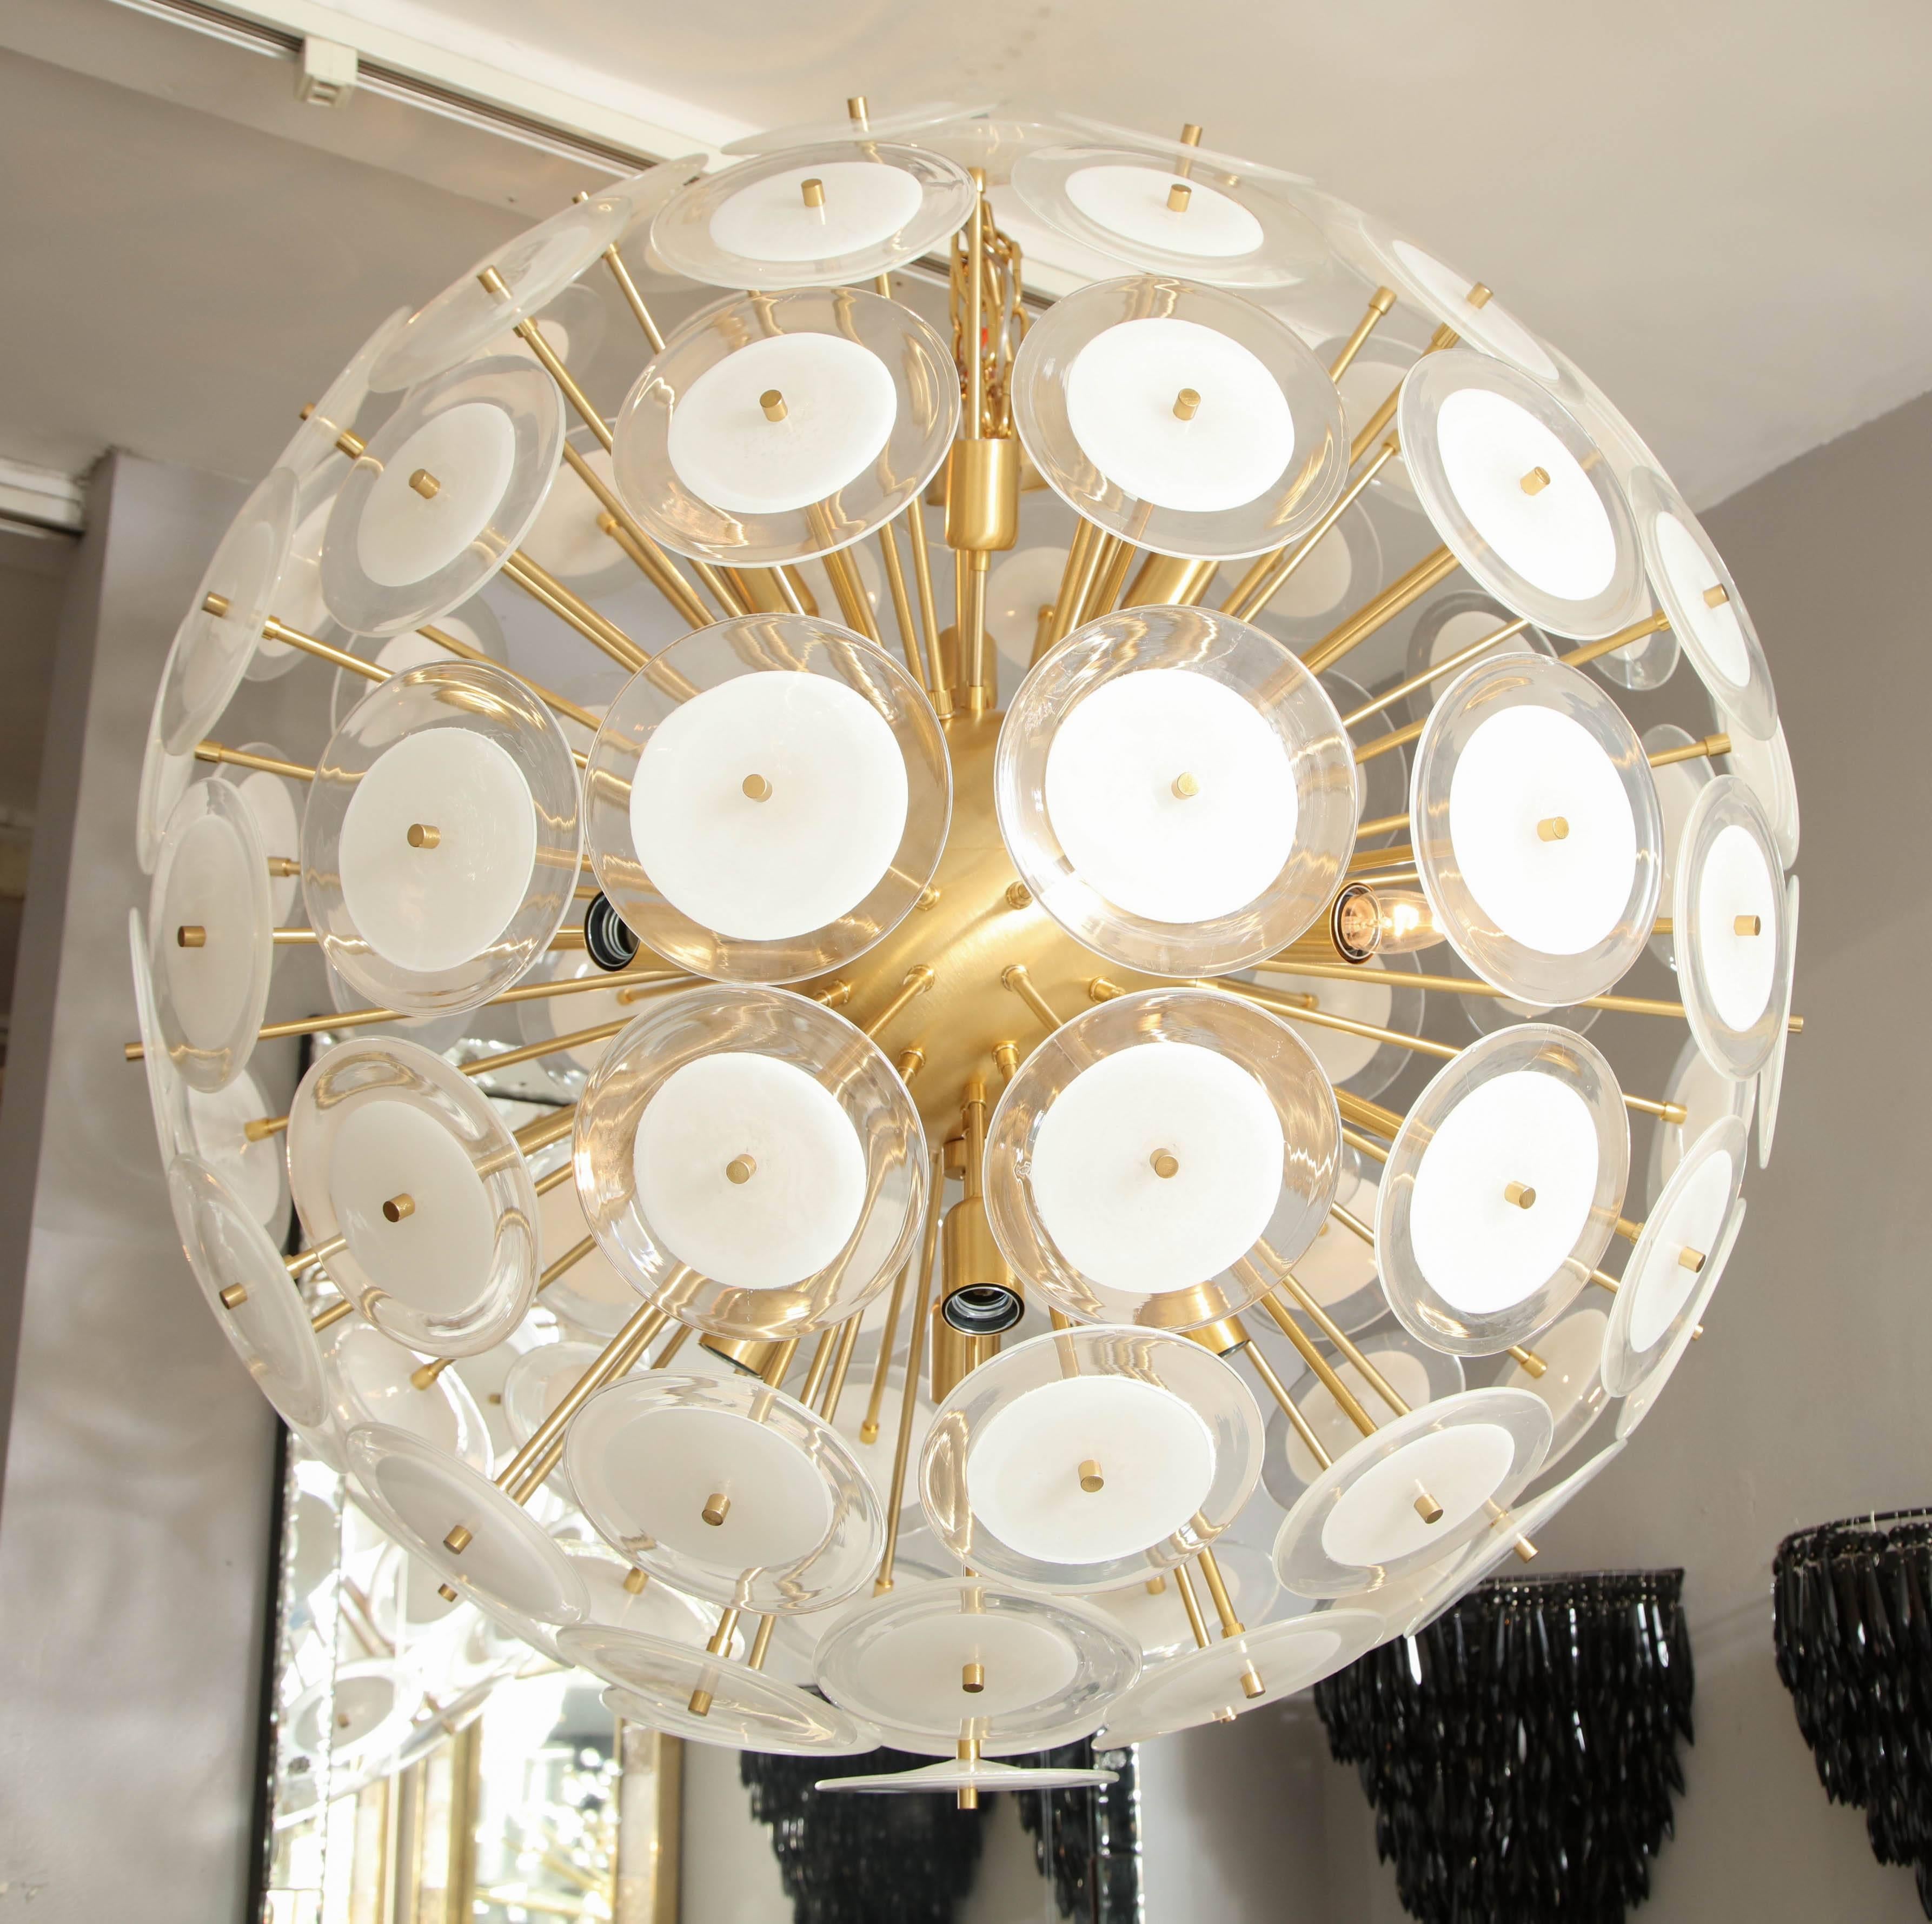 Custom extra large white Murano glass disc Sputnik chandelier, in brass finish. Customization is available in different sizes, finishes and glass colors.